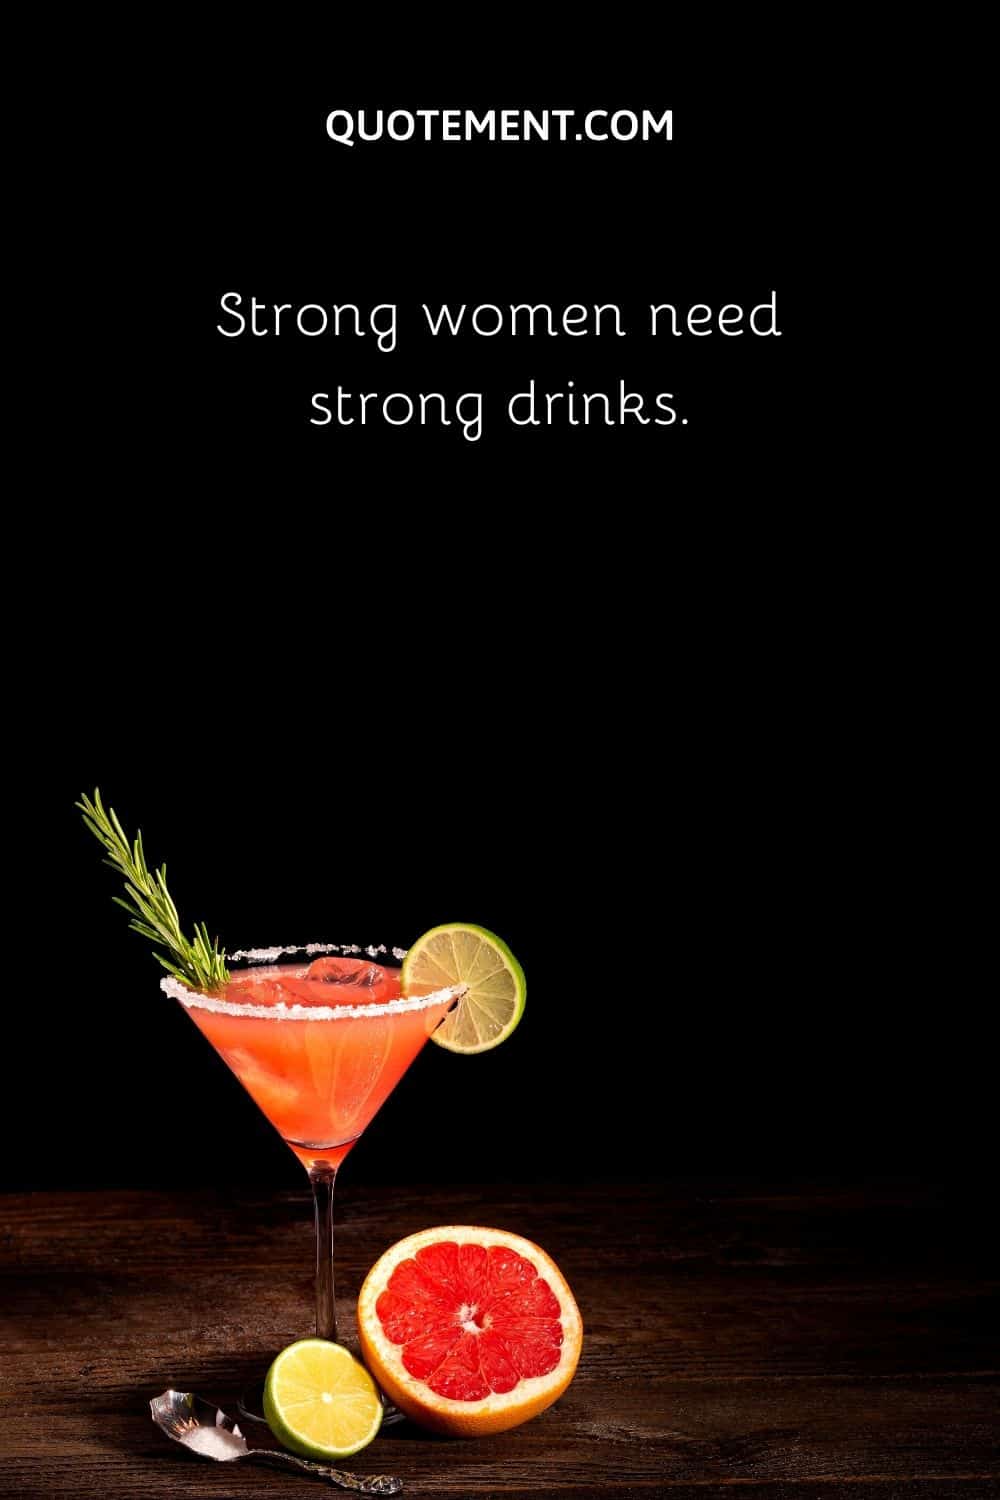 Strong women need strong drinks.